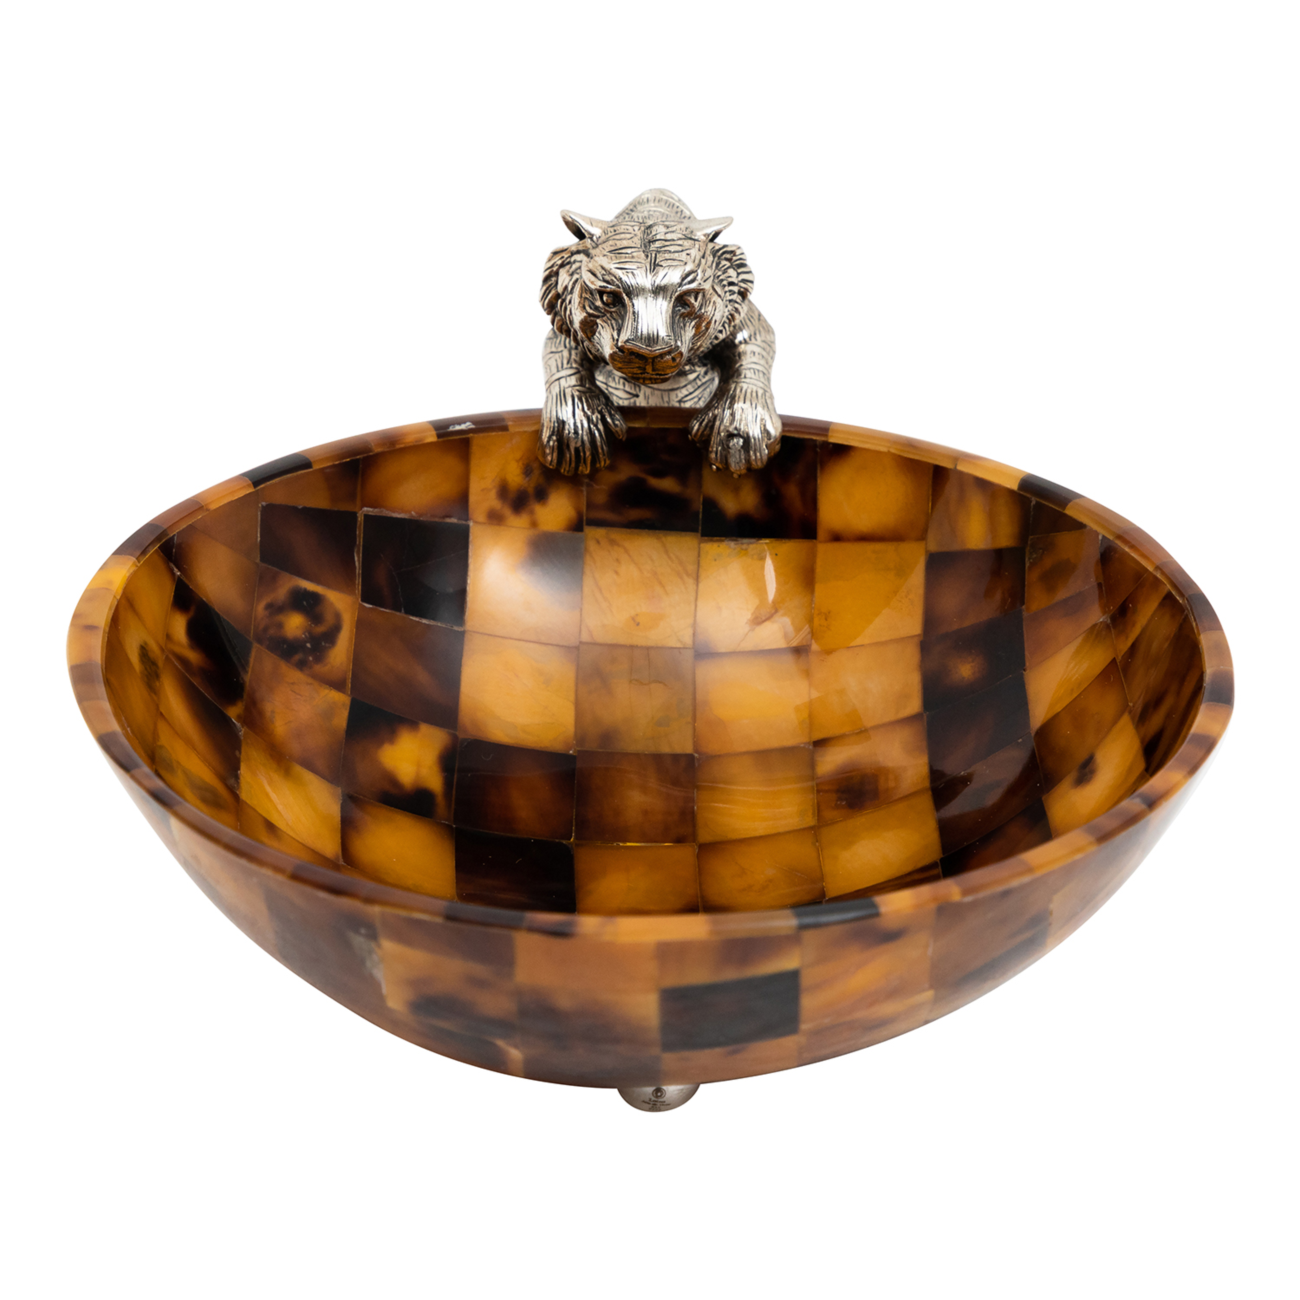 Brown Shell Bowl with Pouncing Silver Tiger